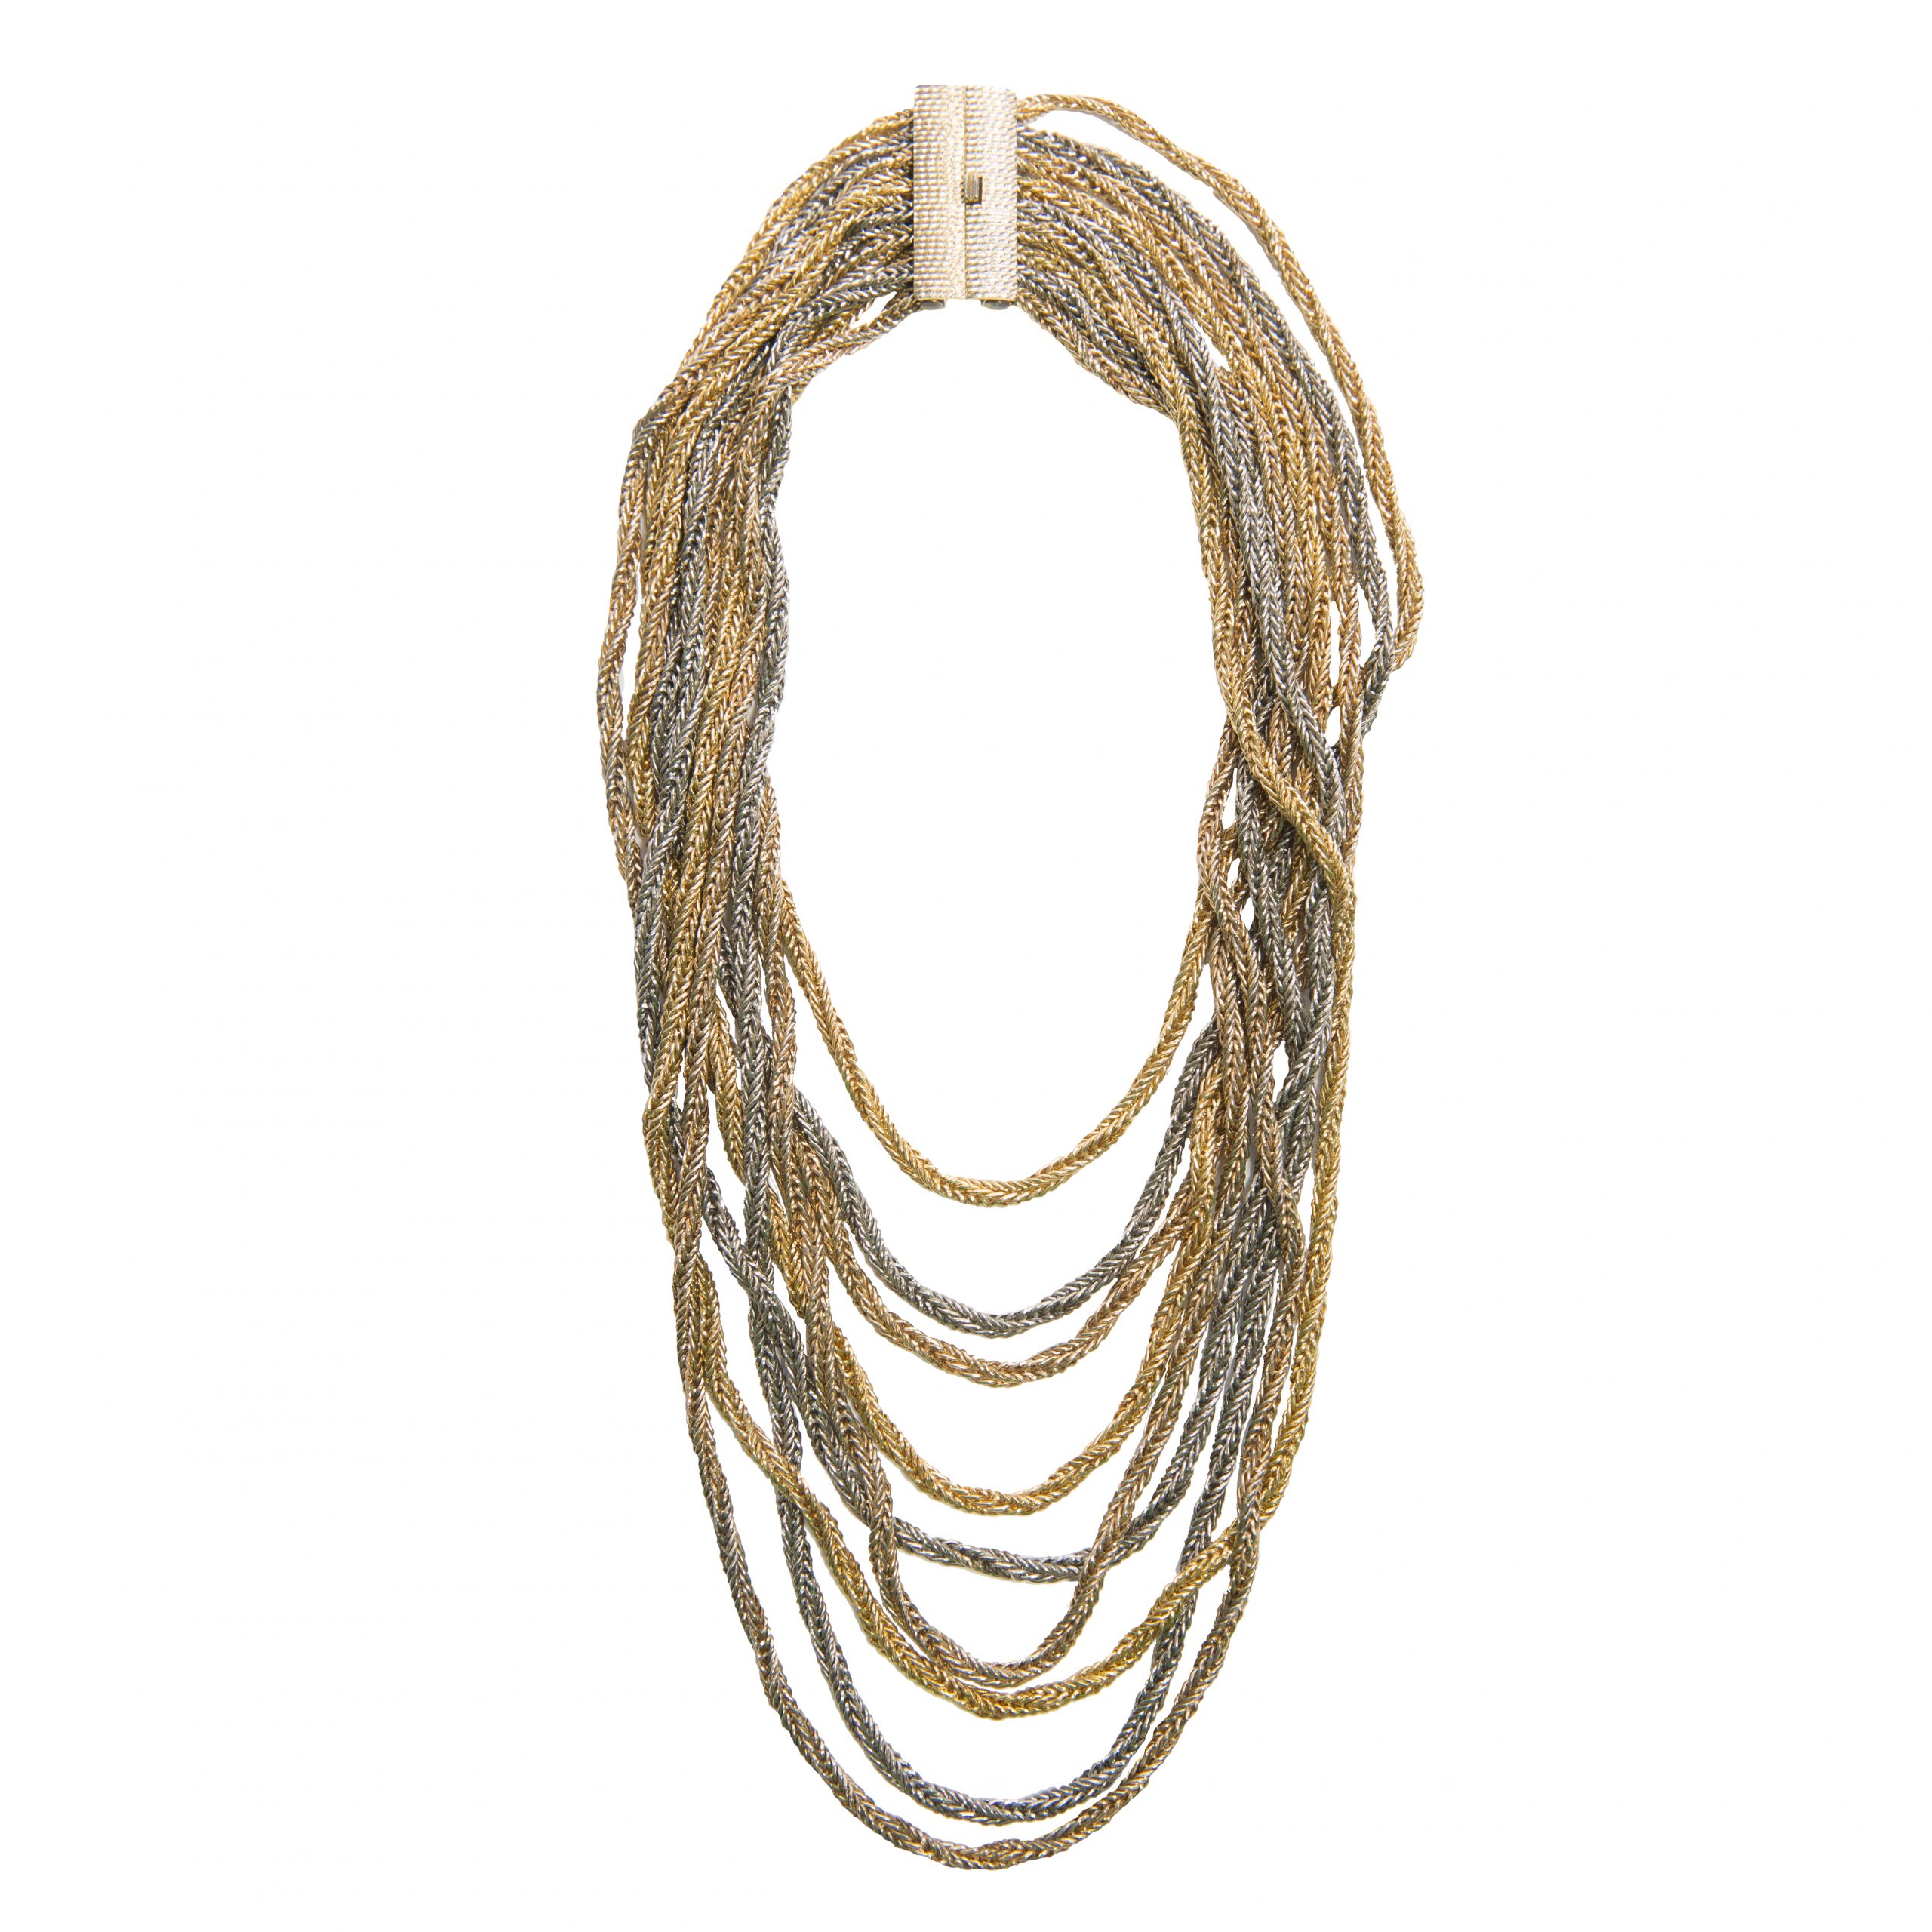 Vintage gold and silver multi chain necklace